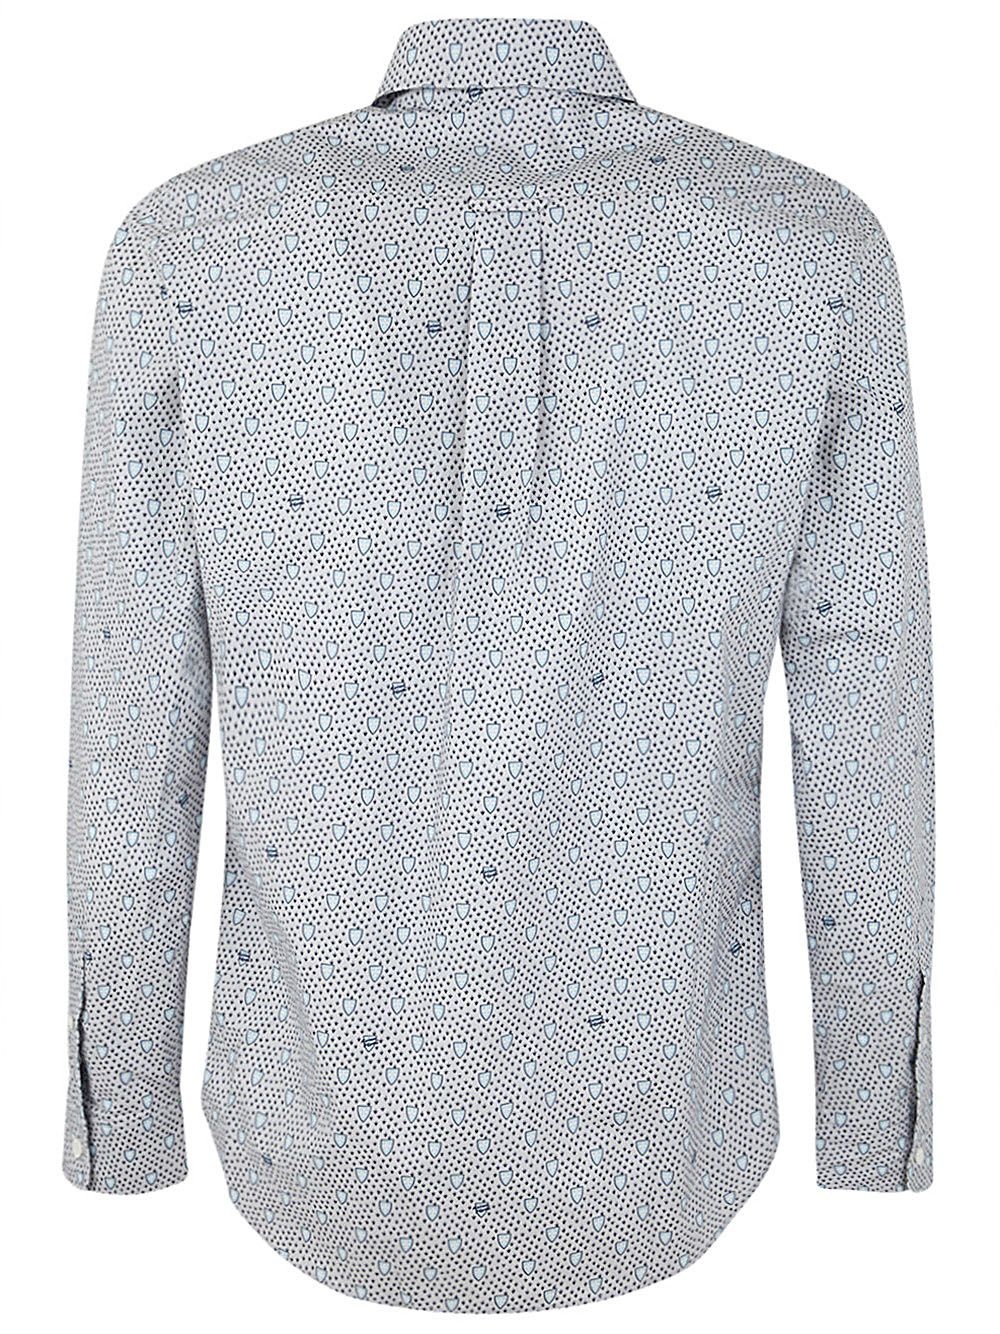 CLASSIC SHIRT IN SHIELD PRINTED COTTON - 2